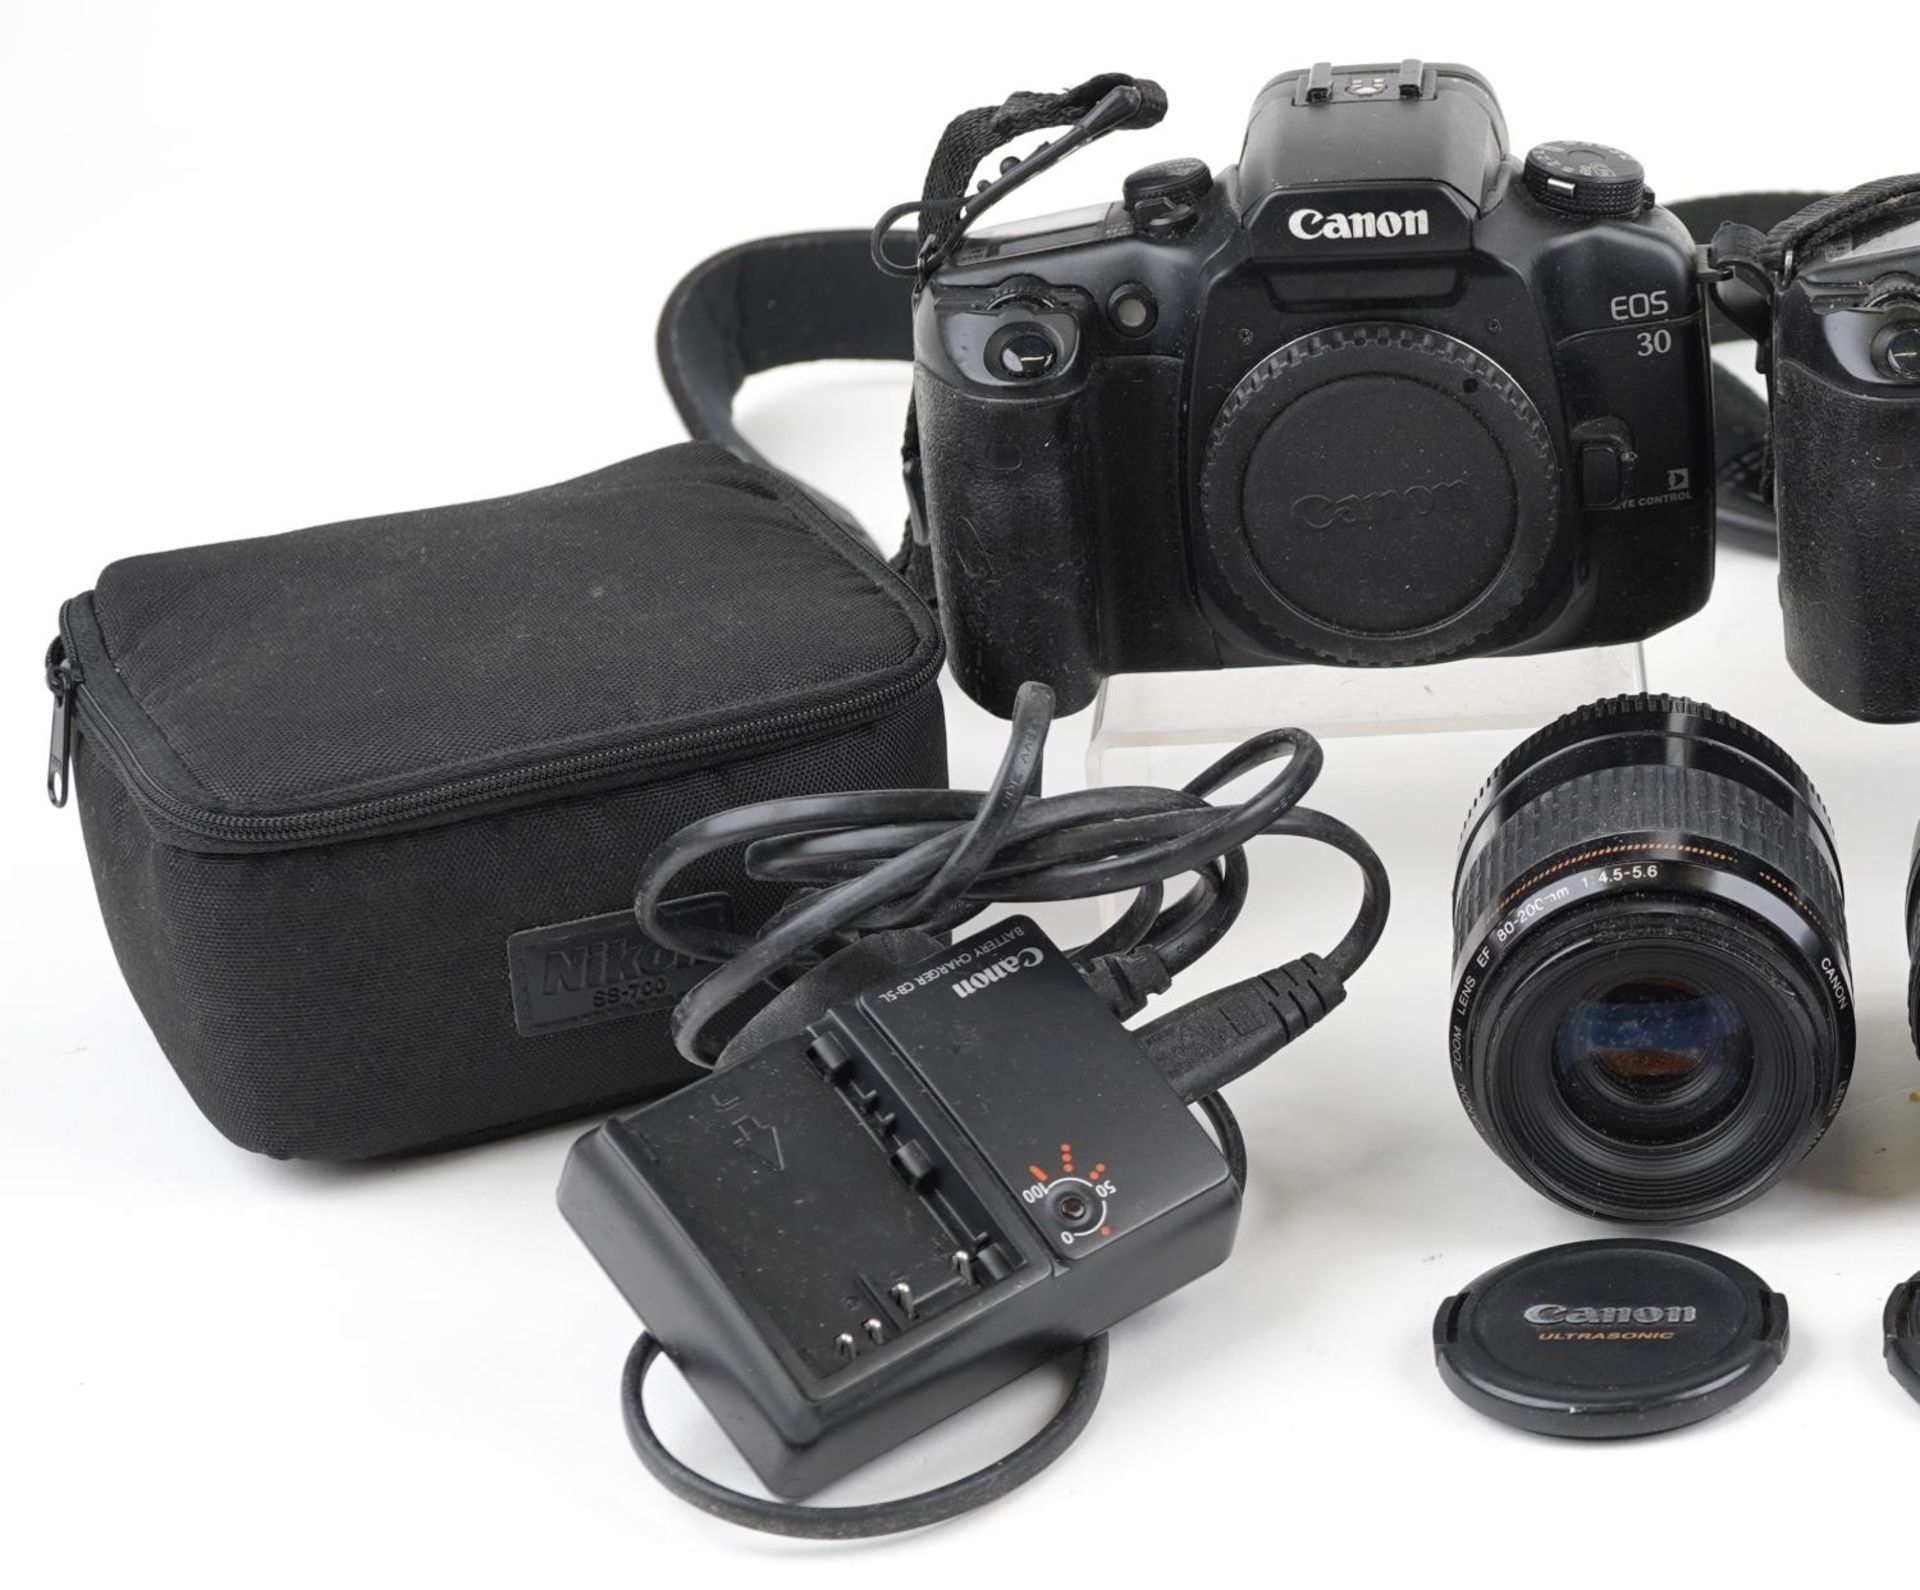 Vintage and later cameras and accessories including a Nikon D90 and two Canon EOS 30 : For further - Bild 2 aus 3